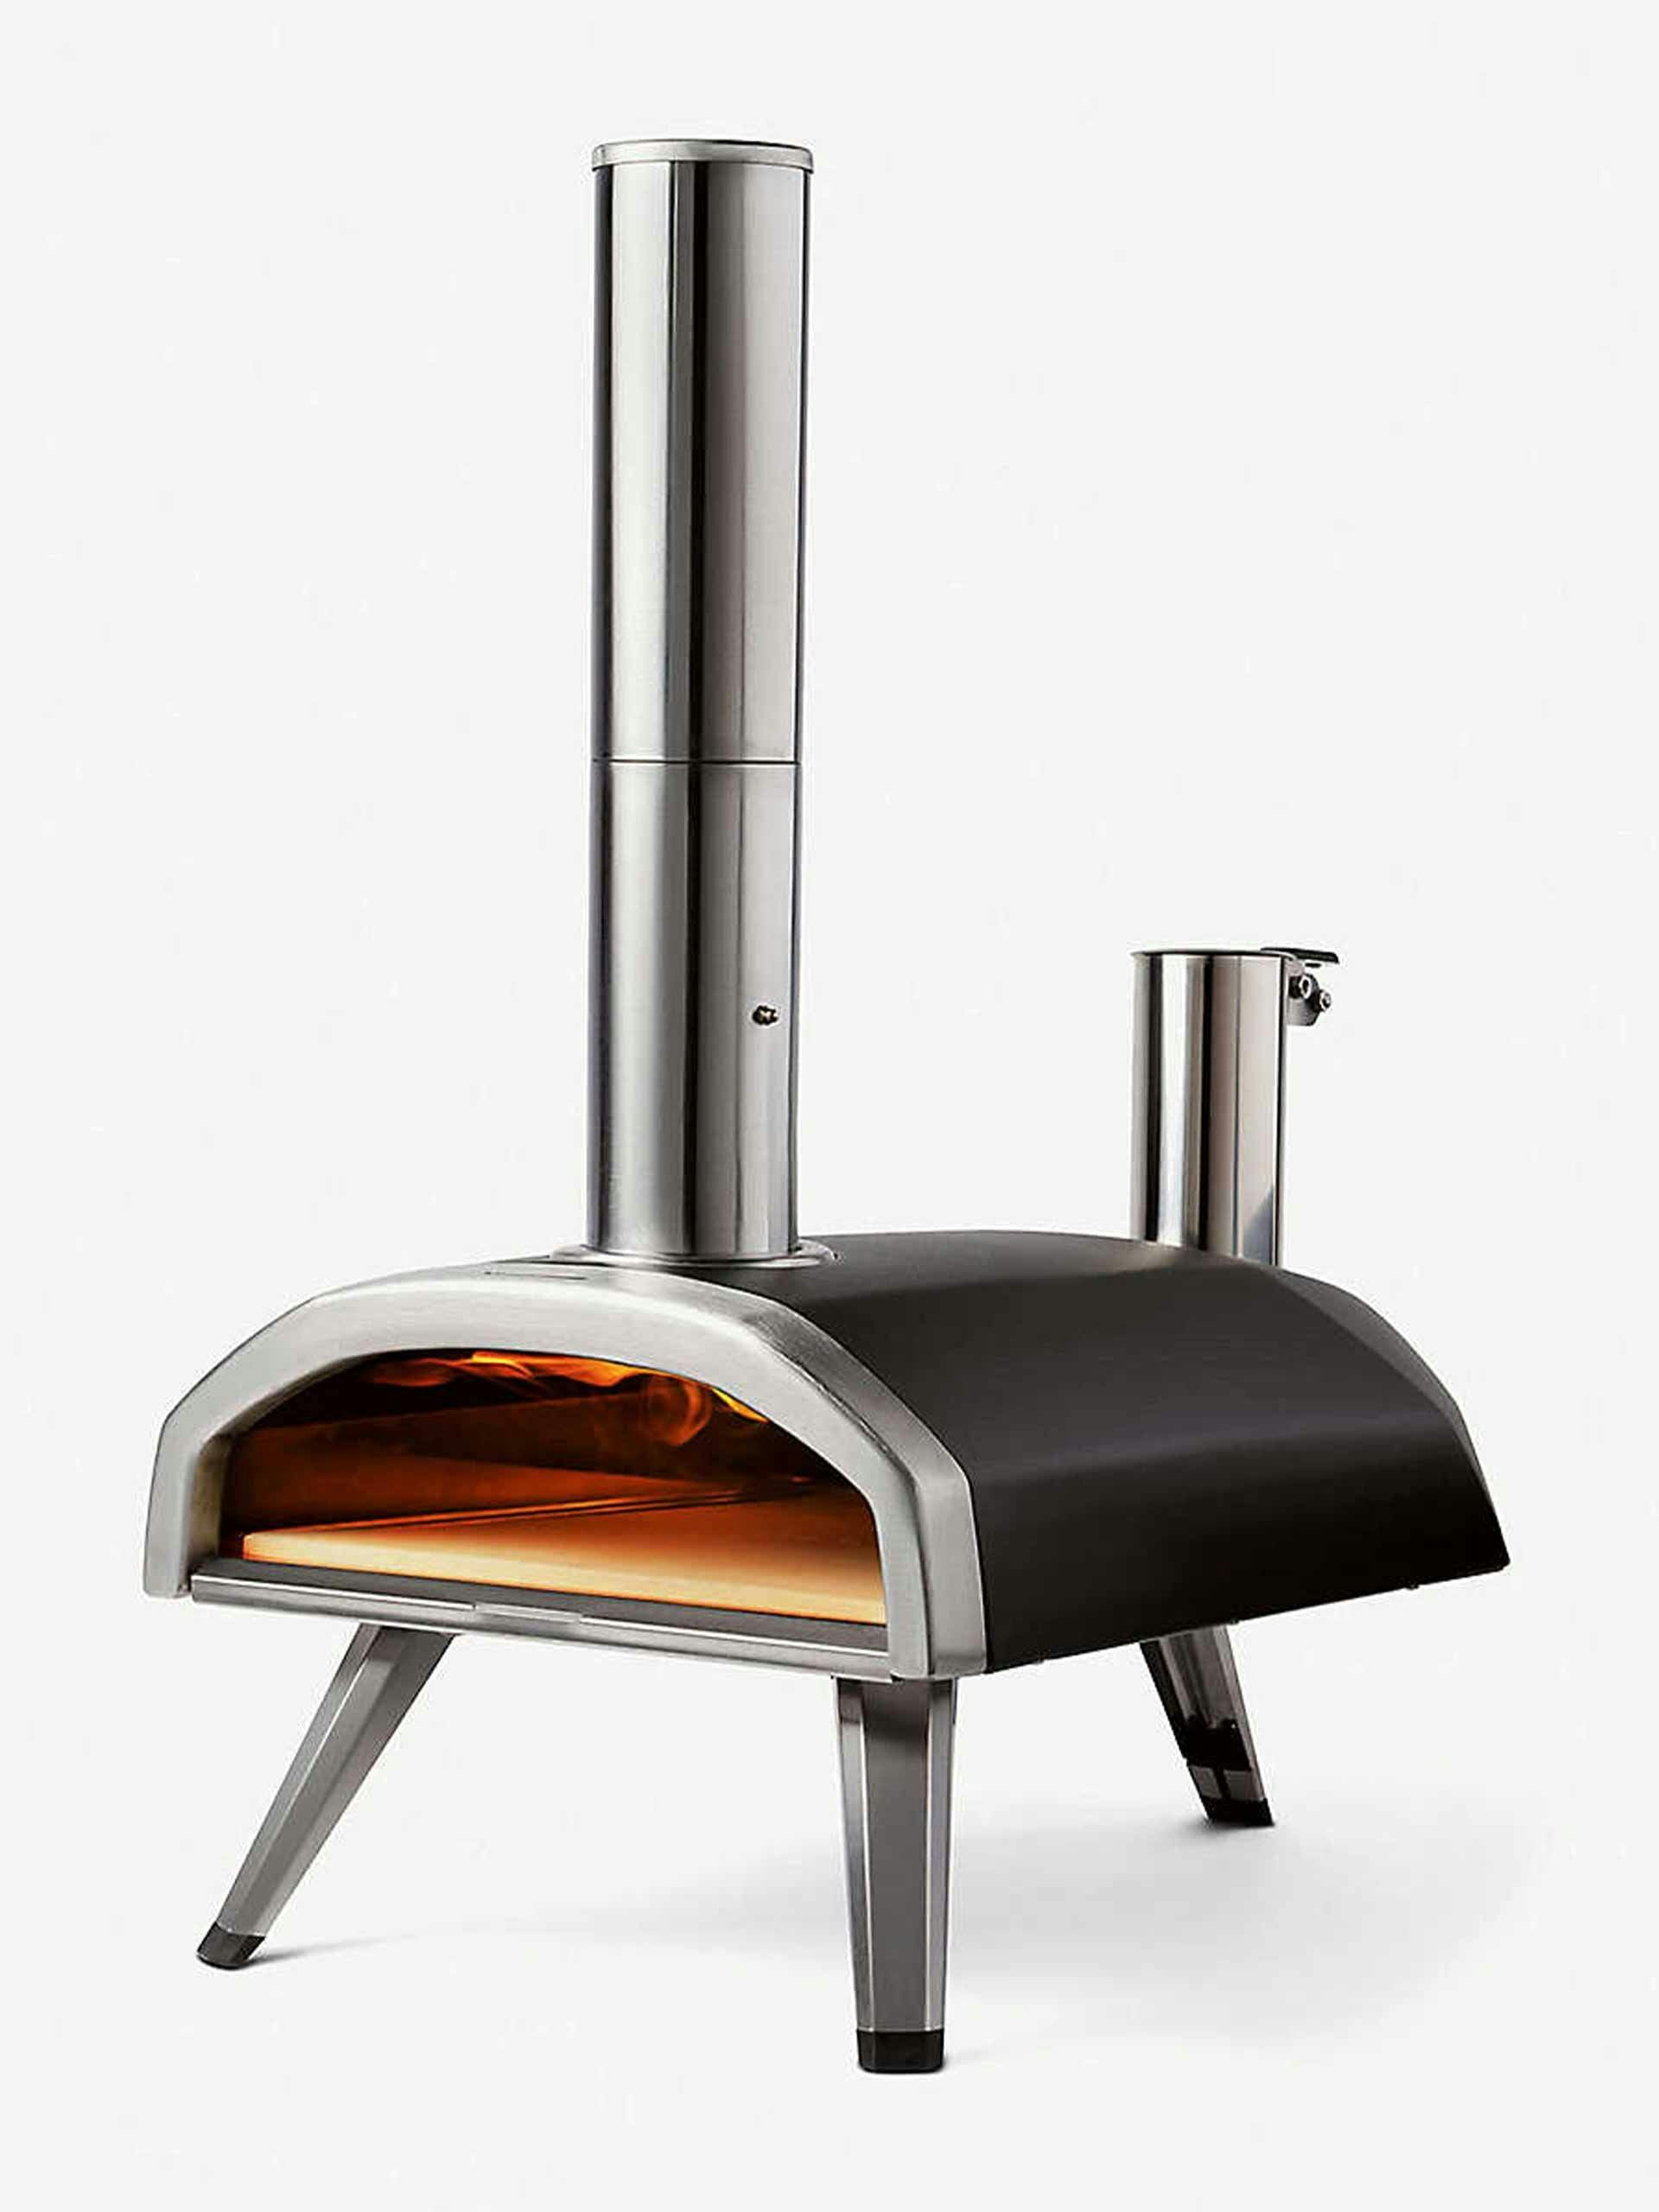 Portable wood-fired outdoor pizza oven